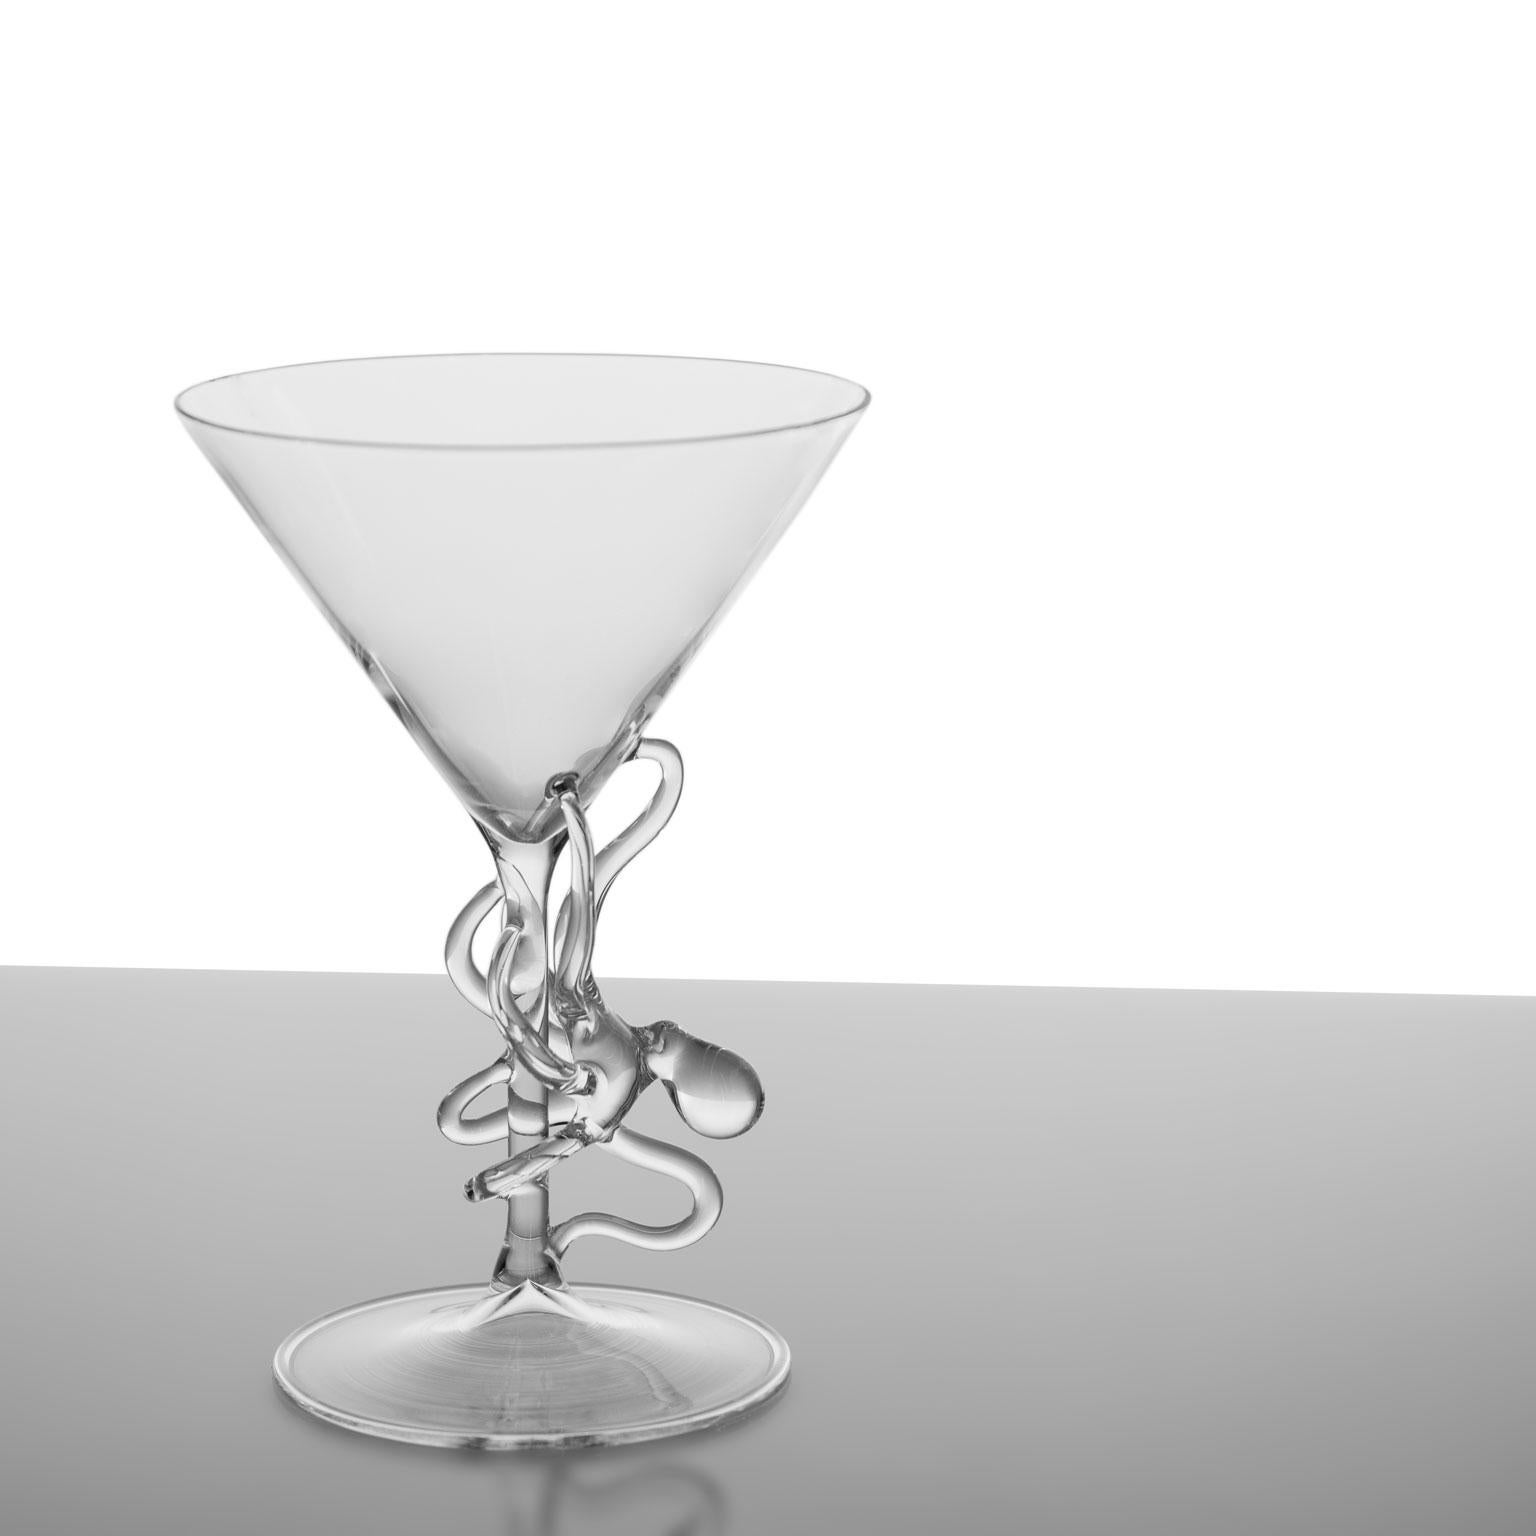 'Polpo Martini Glass'
A Hand-Blown Martini Glass by Simone Crestani
Polpo Martini Glass is one of the pieces from the Polpo Collection.

The enveloping elegance of the Polpo Collection may make you believe that the animal is really wrapping the